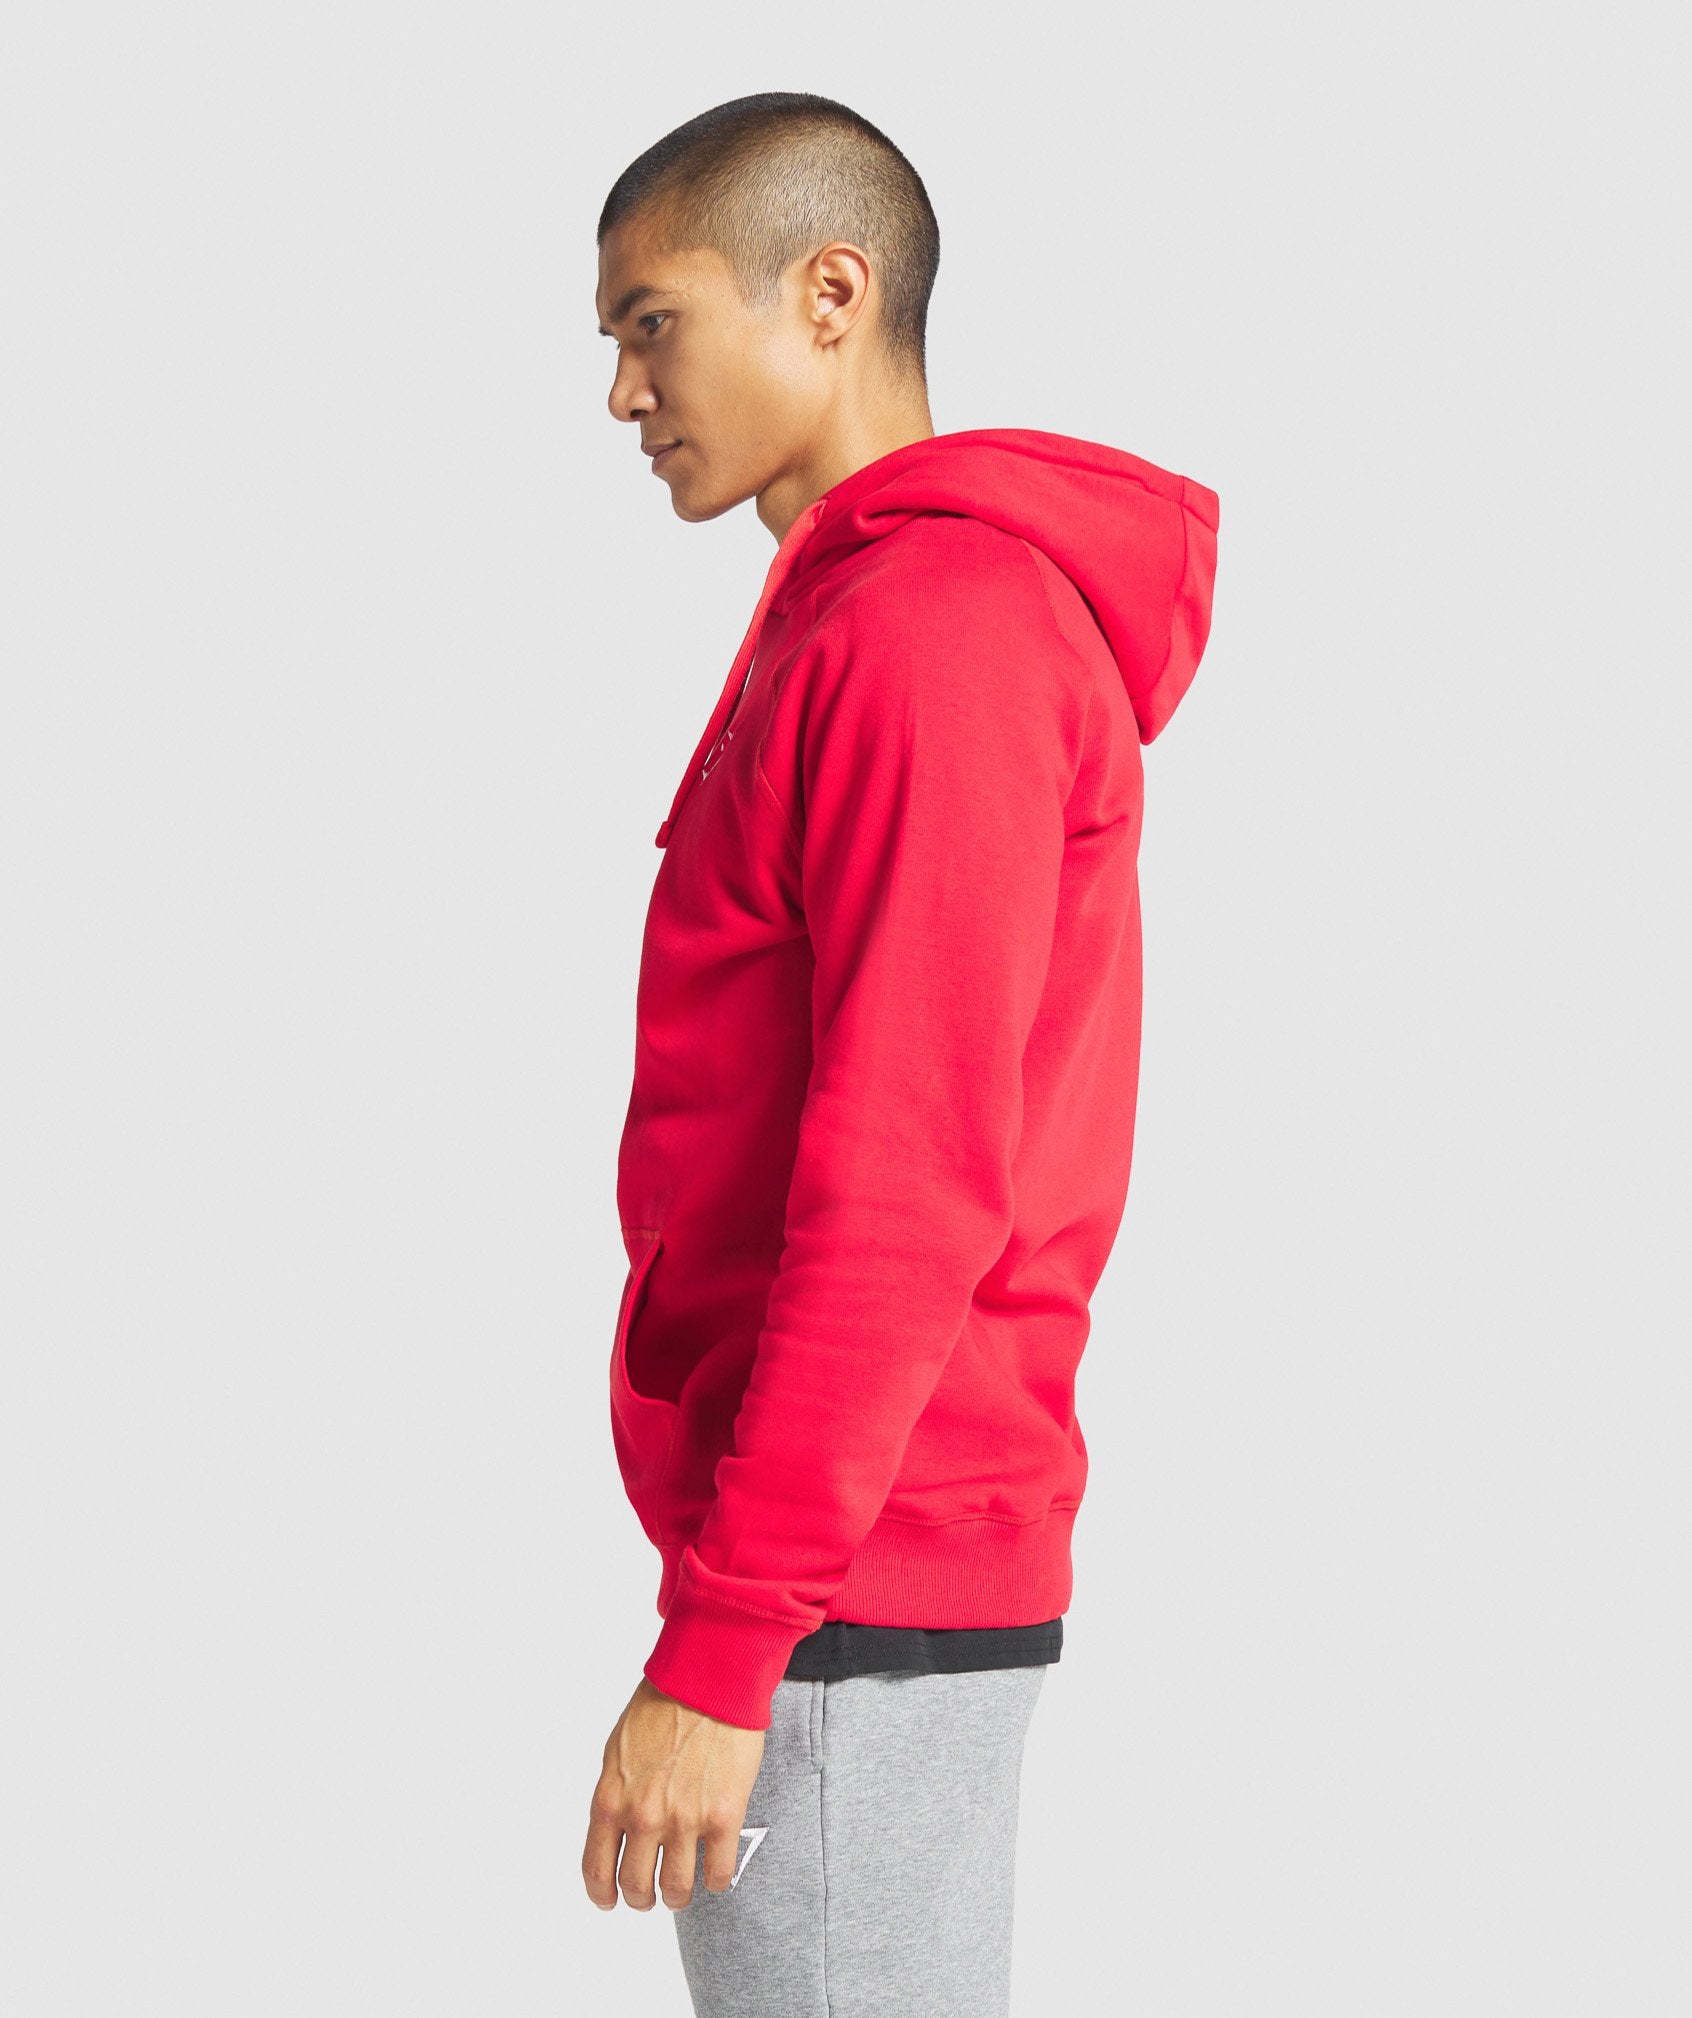 Crest Hoodie in Red